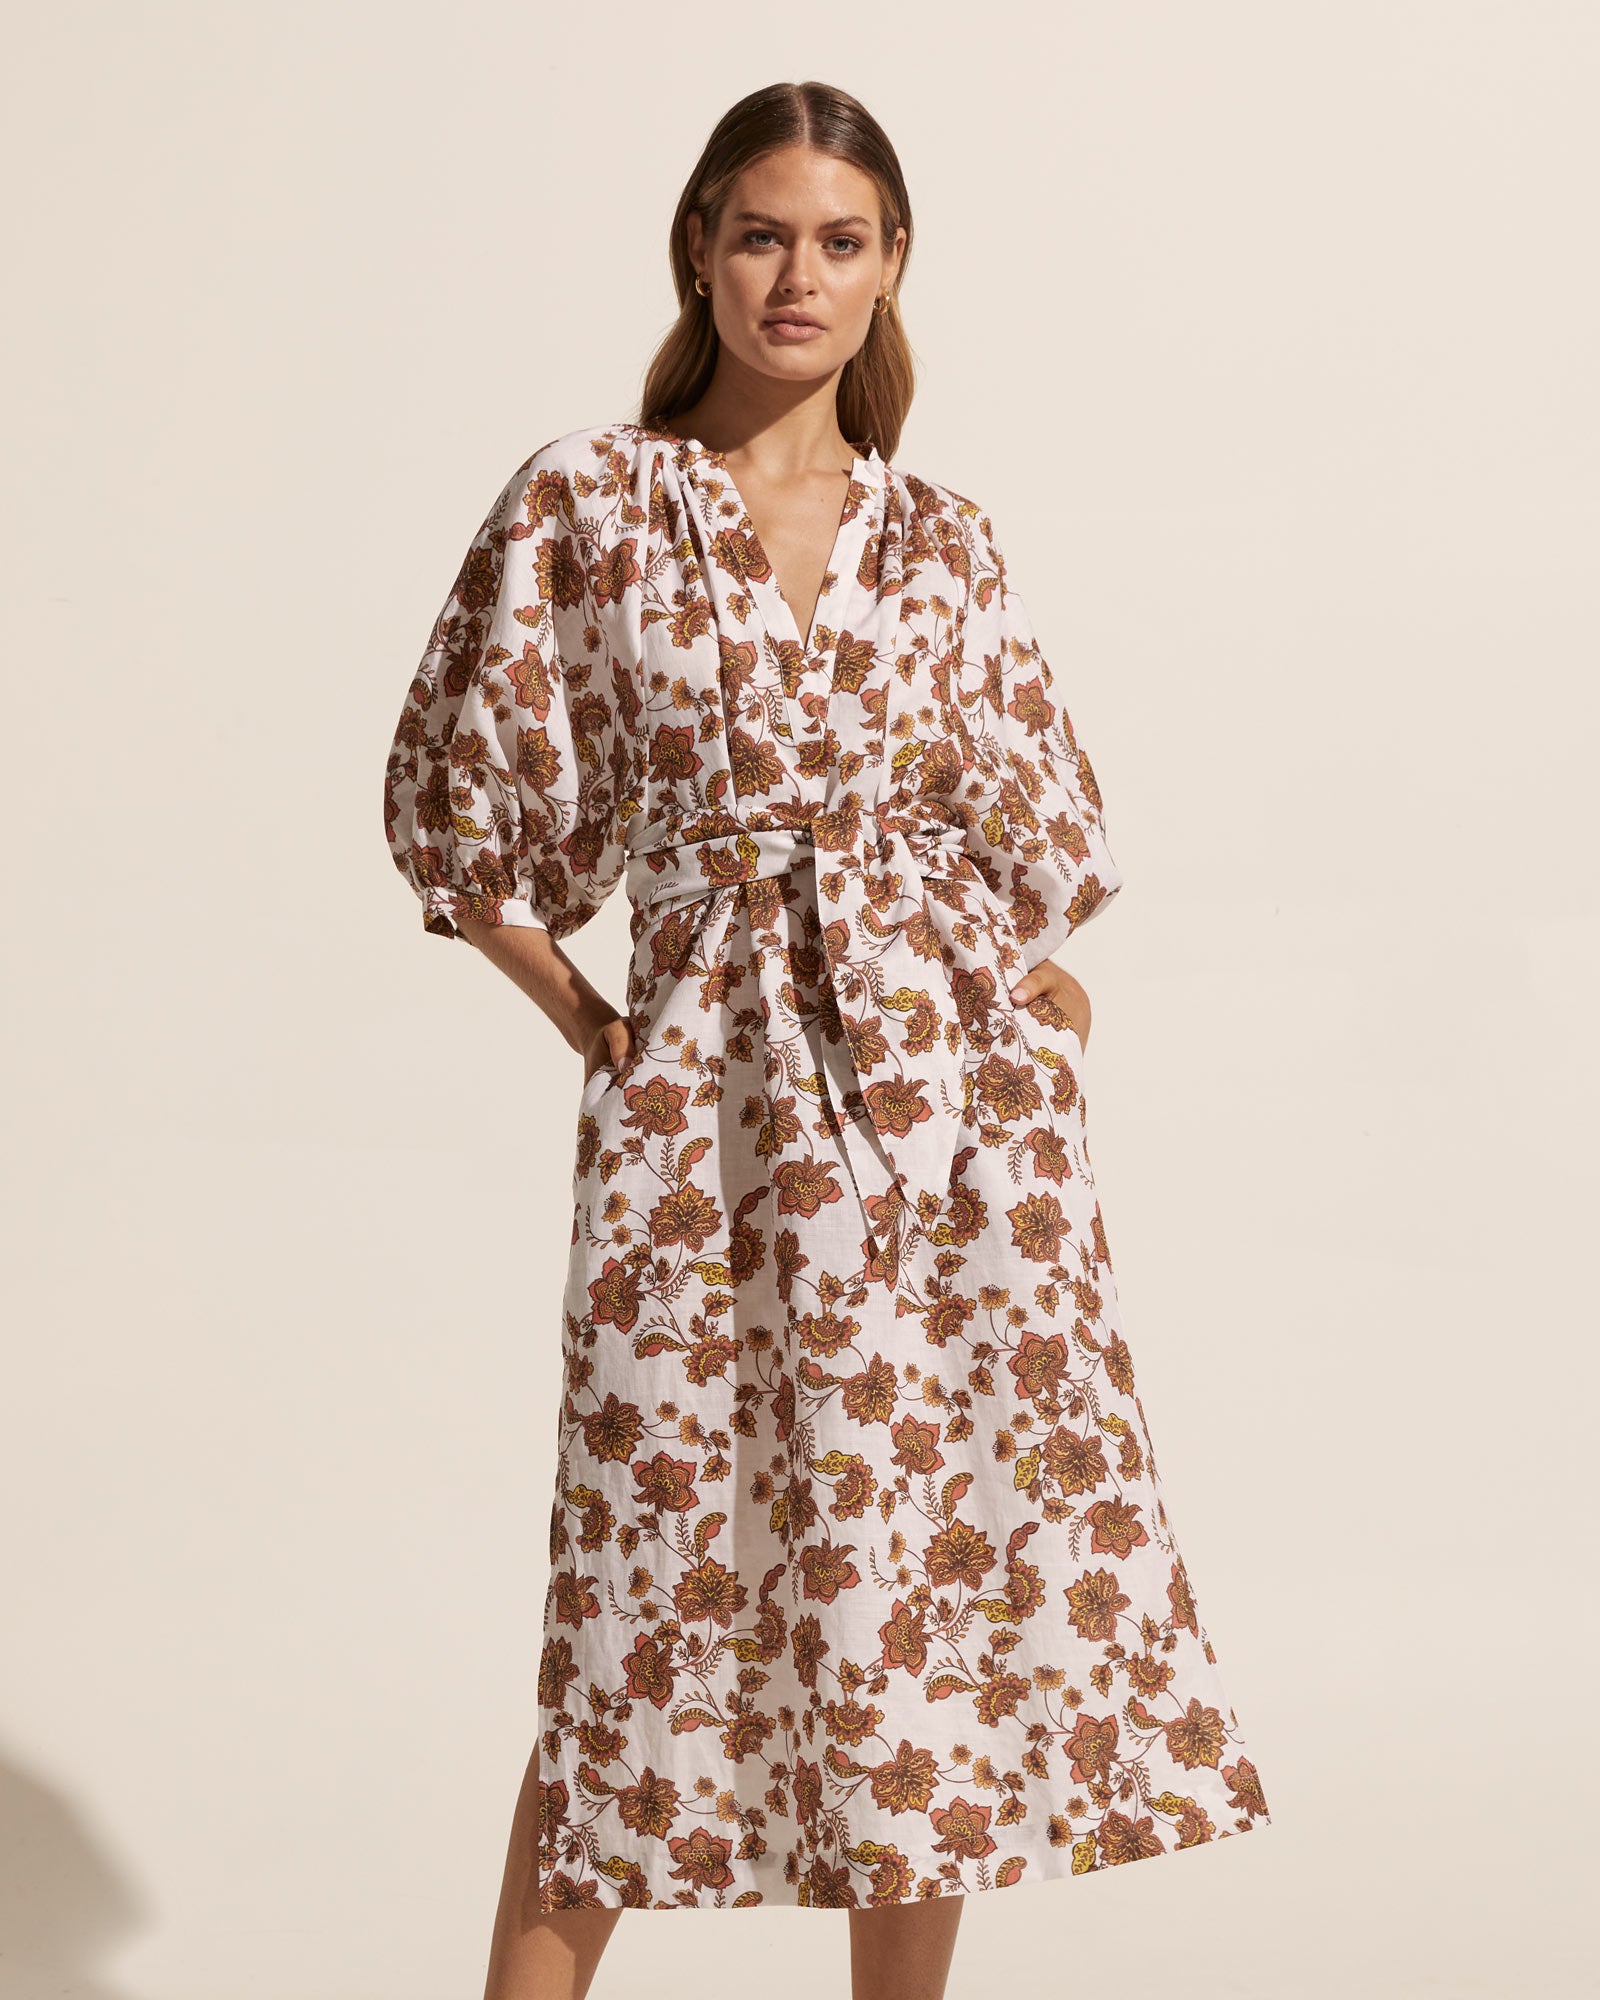 motto dress - spice floral